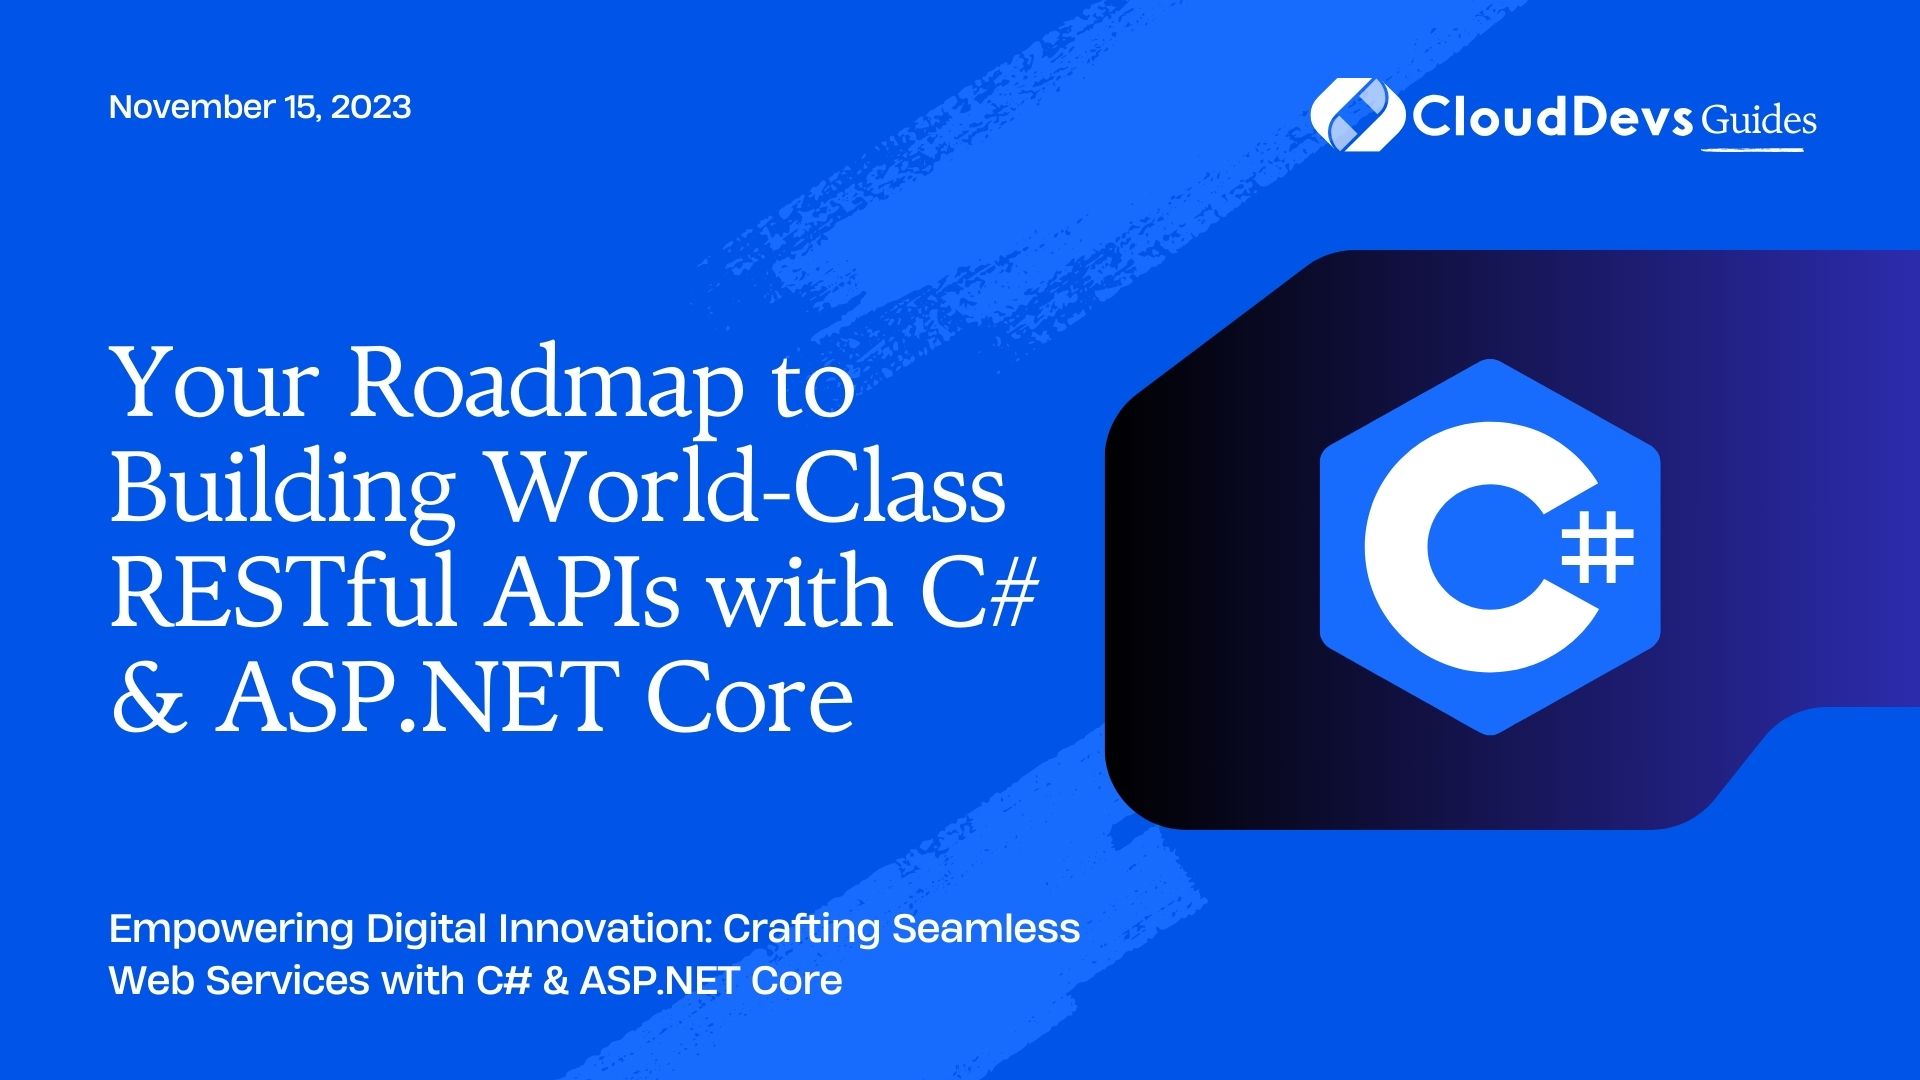 Your Roadmap to Building World-Class RESTful APIs with C# & ASP.NET Core